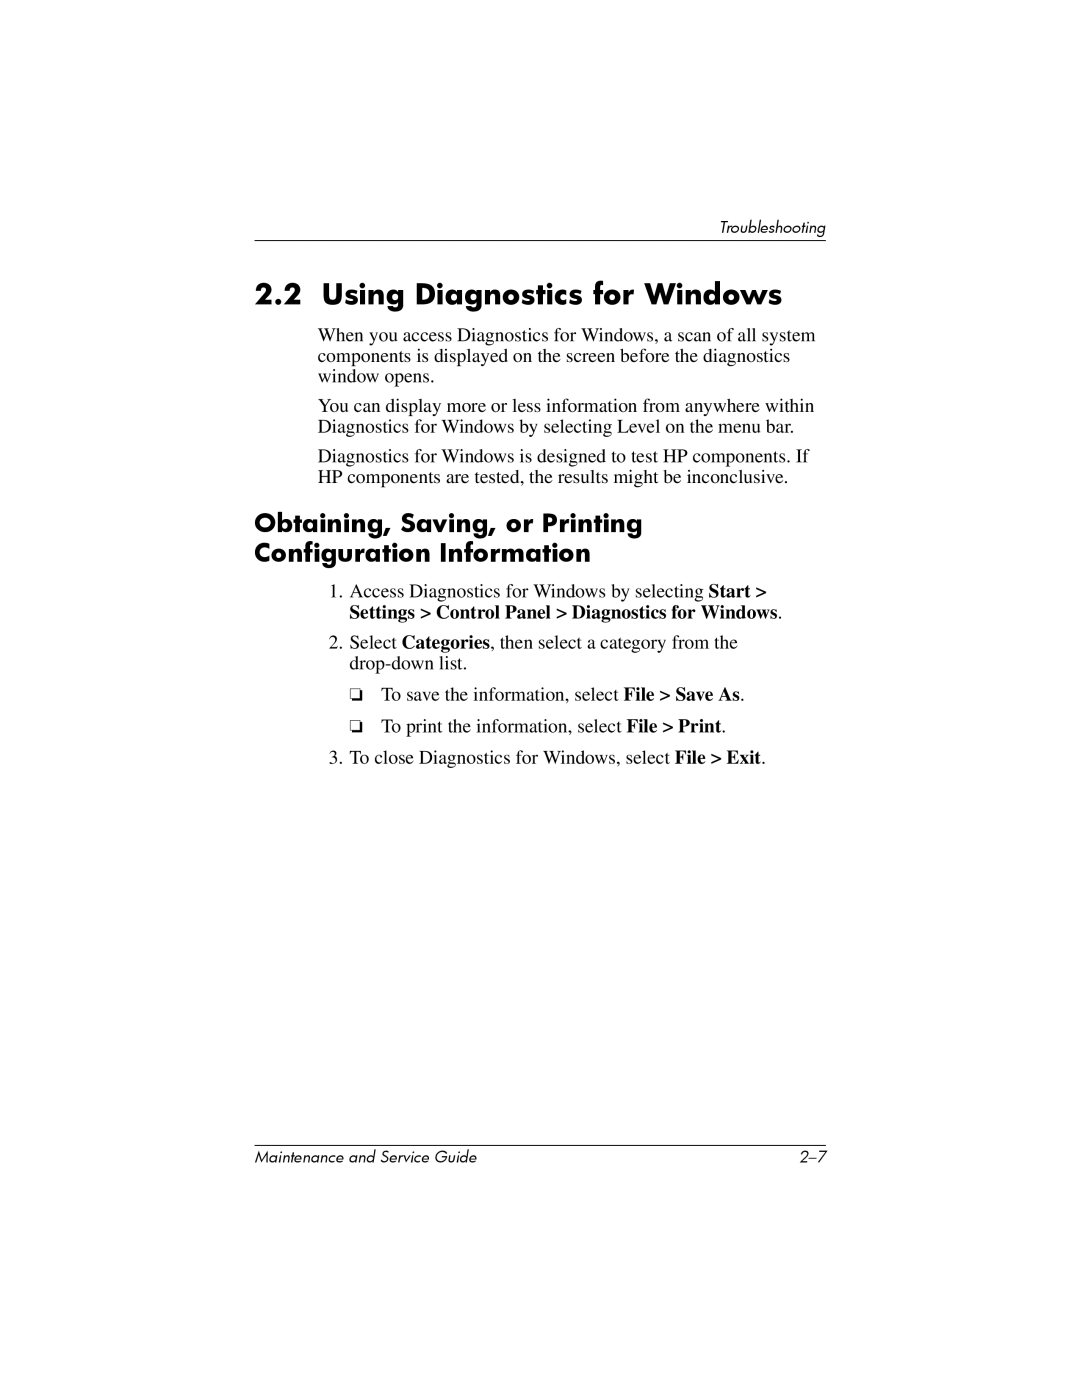 HP nw8000 manual Using Diagnostics for Windows, Obtaining, Saving, or Printing Configuration Information 